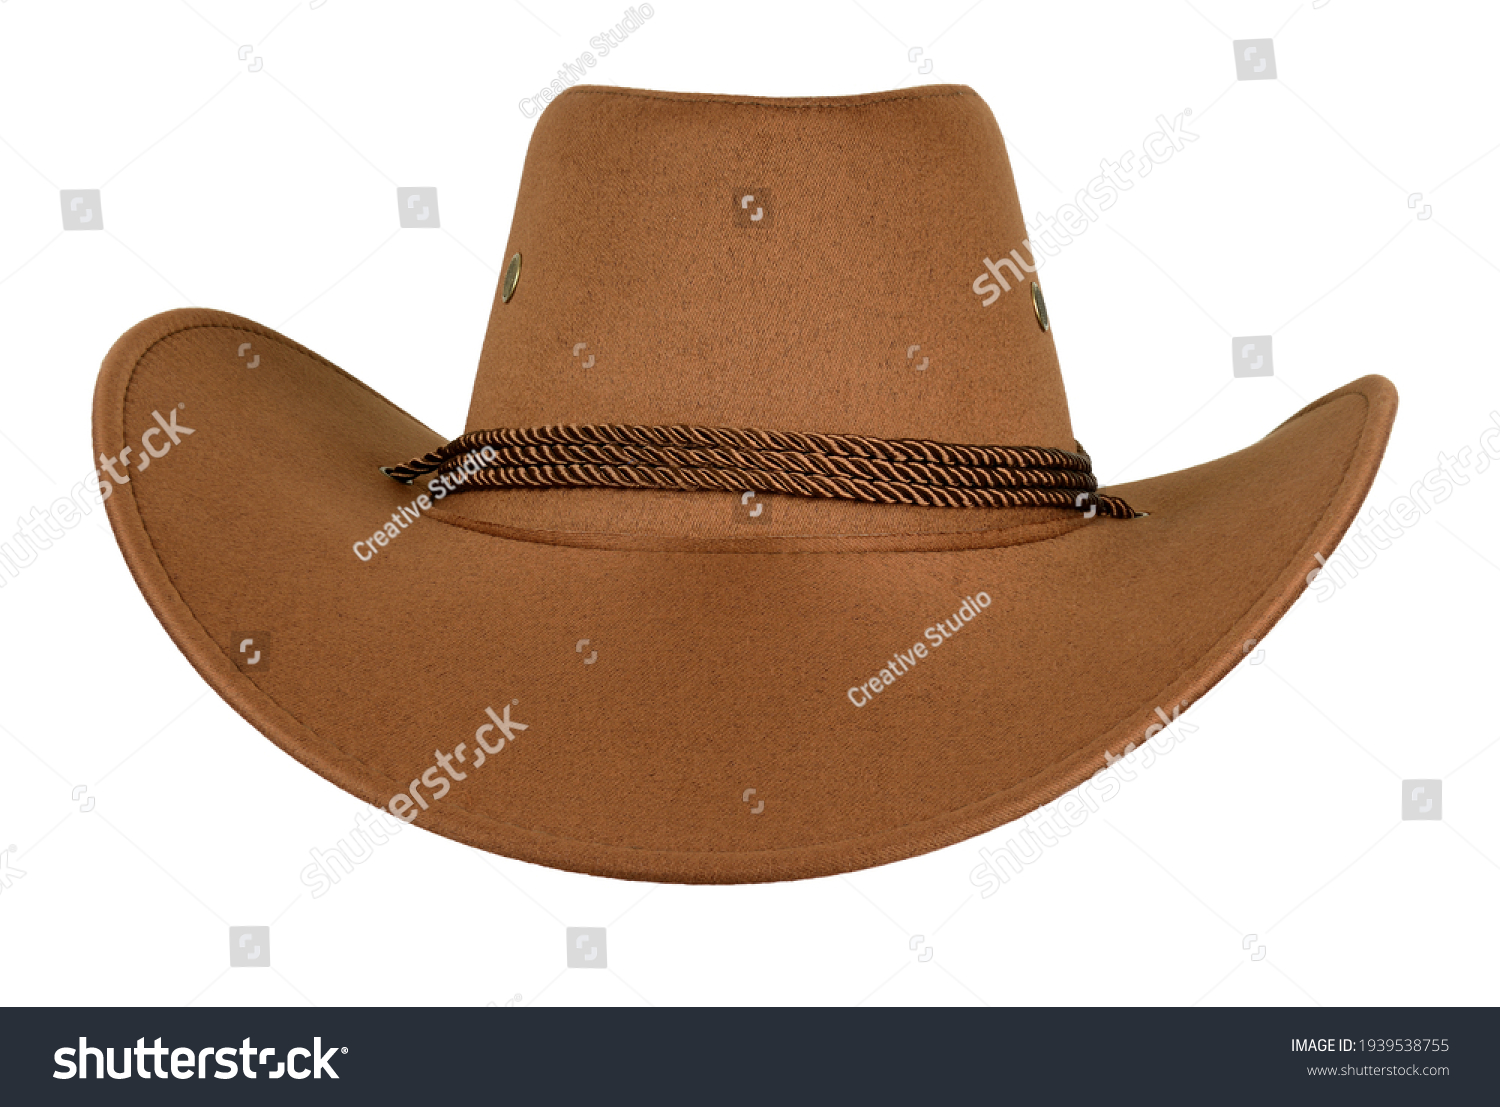 A brown cowboy hat isolated on a white background front view #1939538755